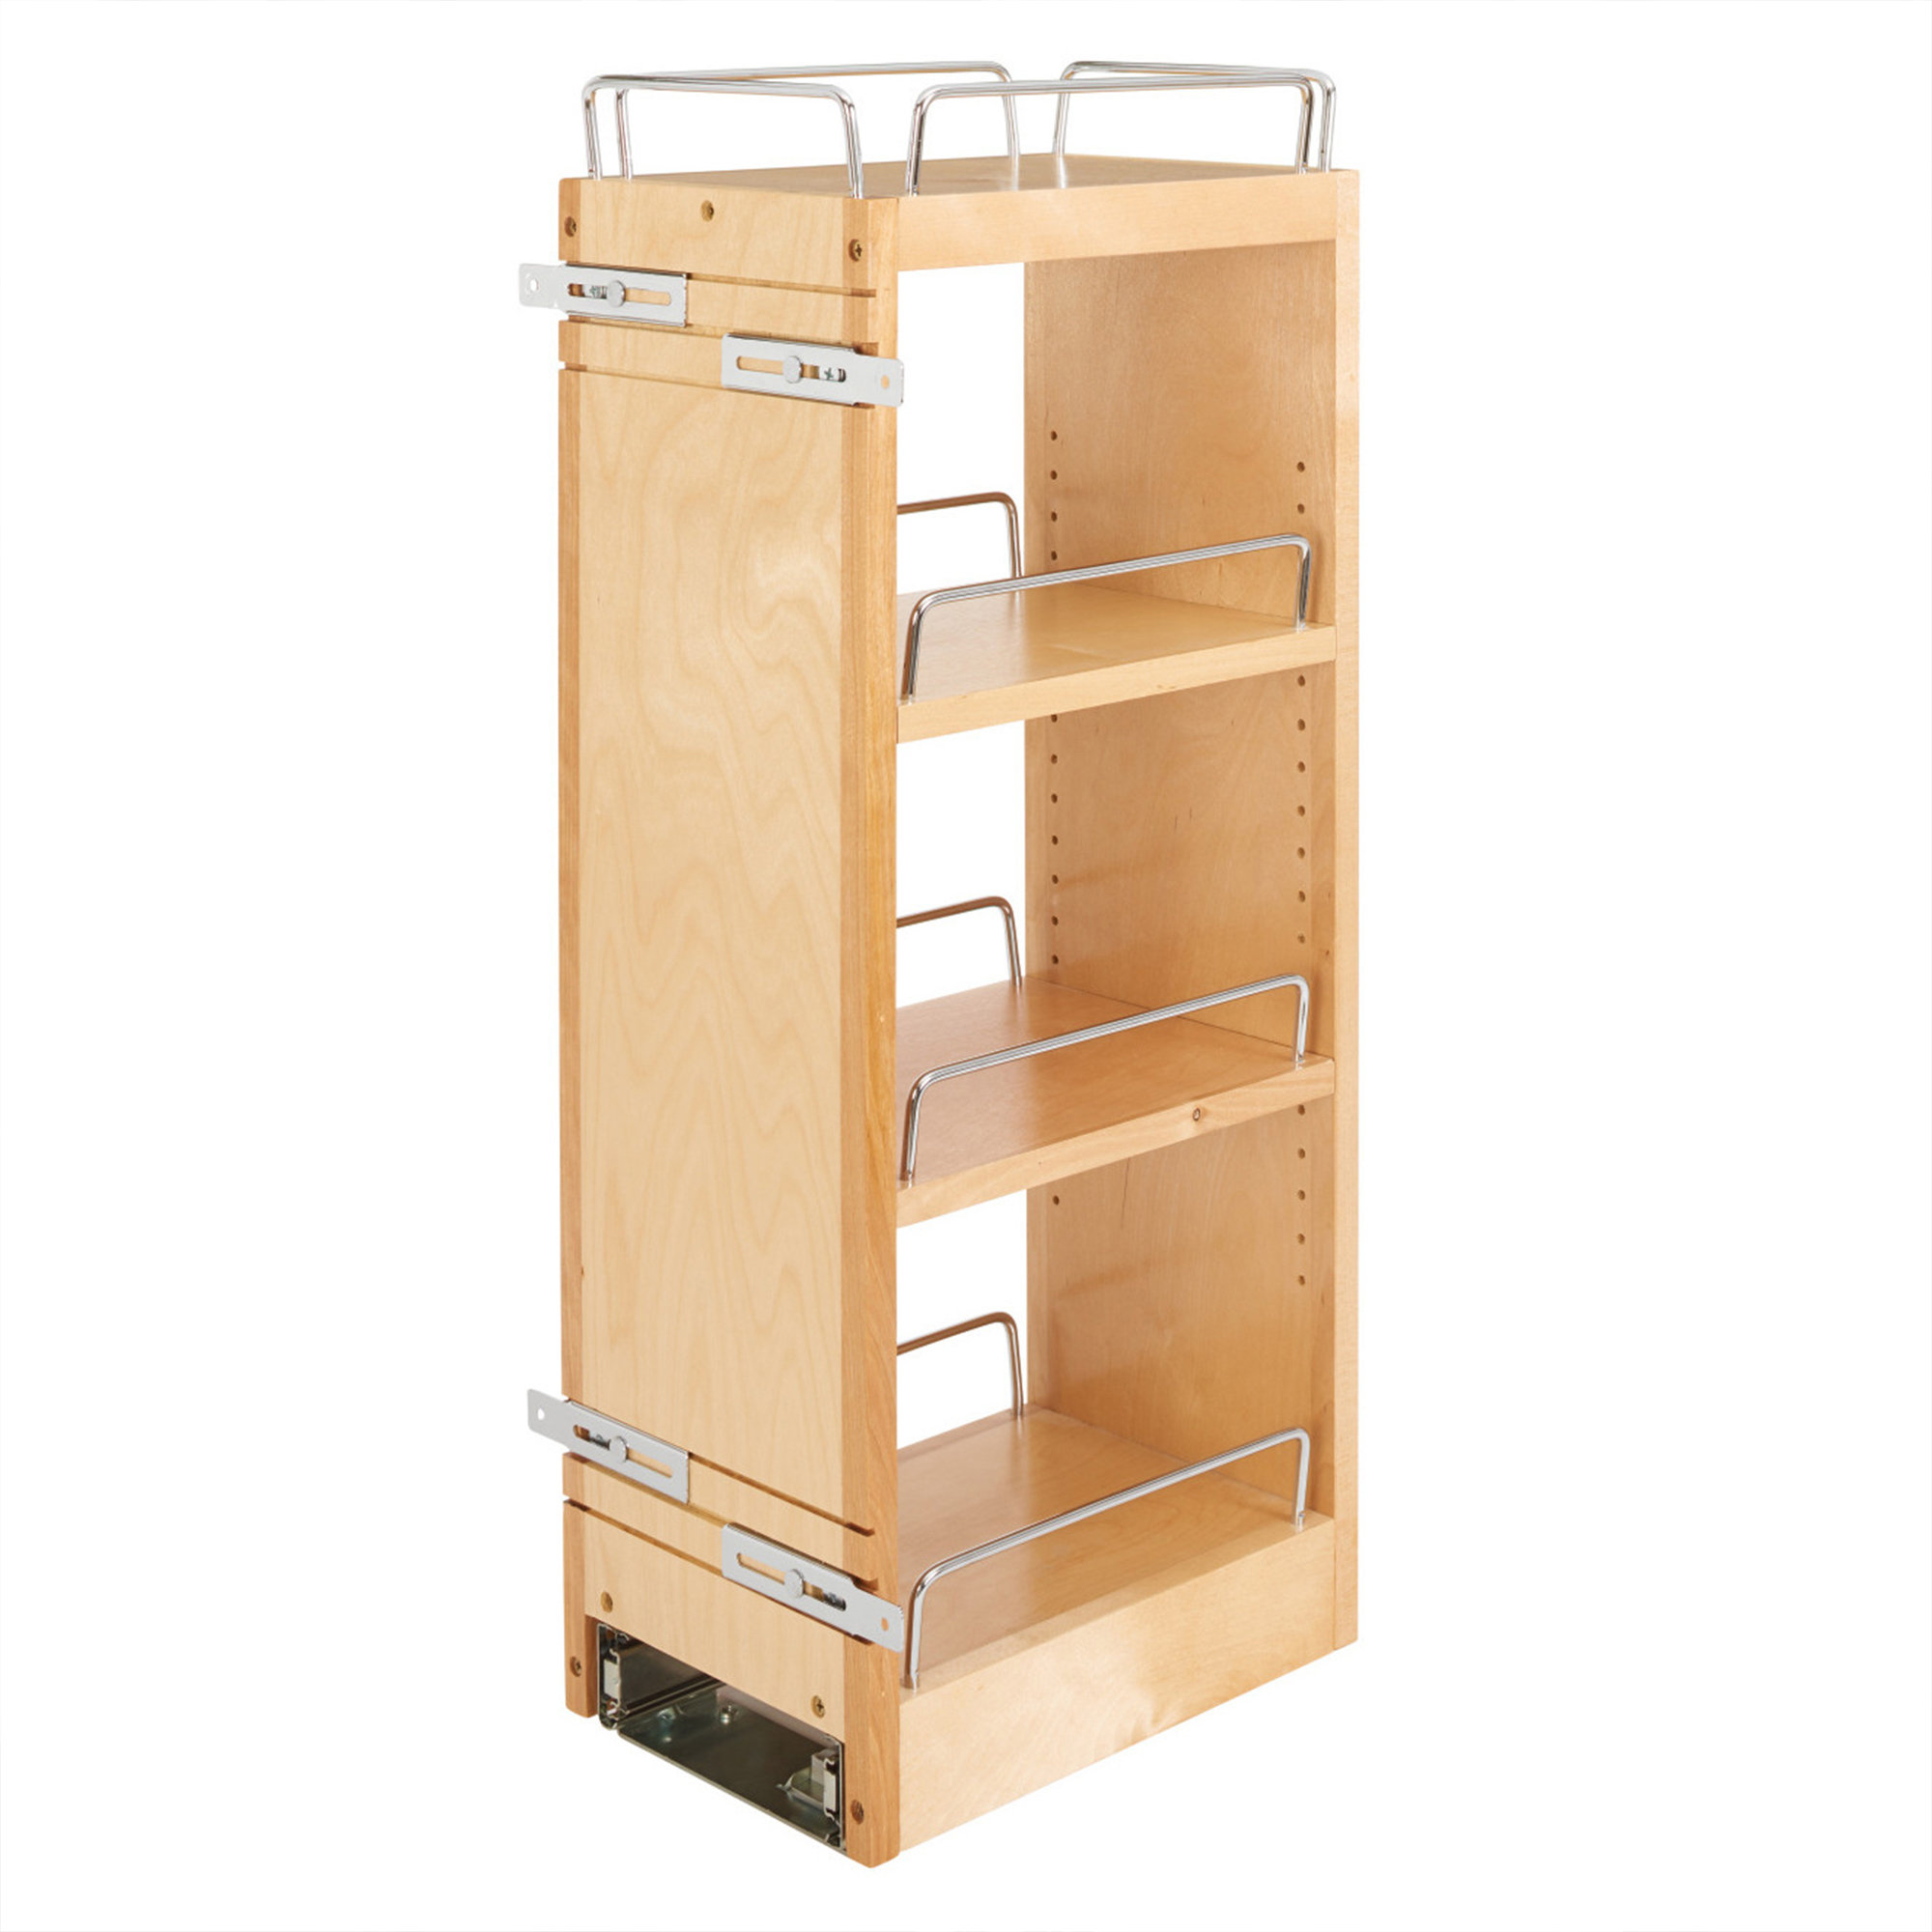 Rev-A-Shelf 8 Inch Width Wood Pull-Out Organizer with Adjustable